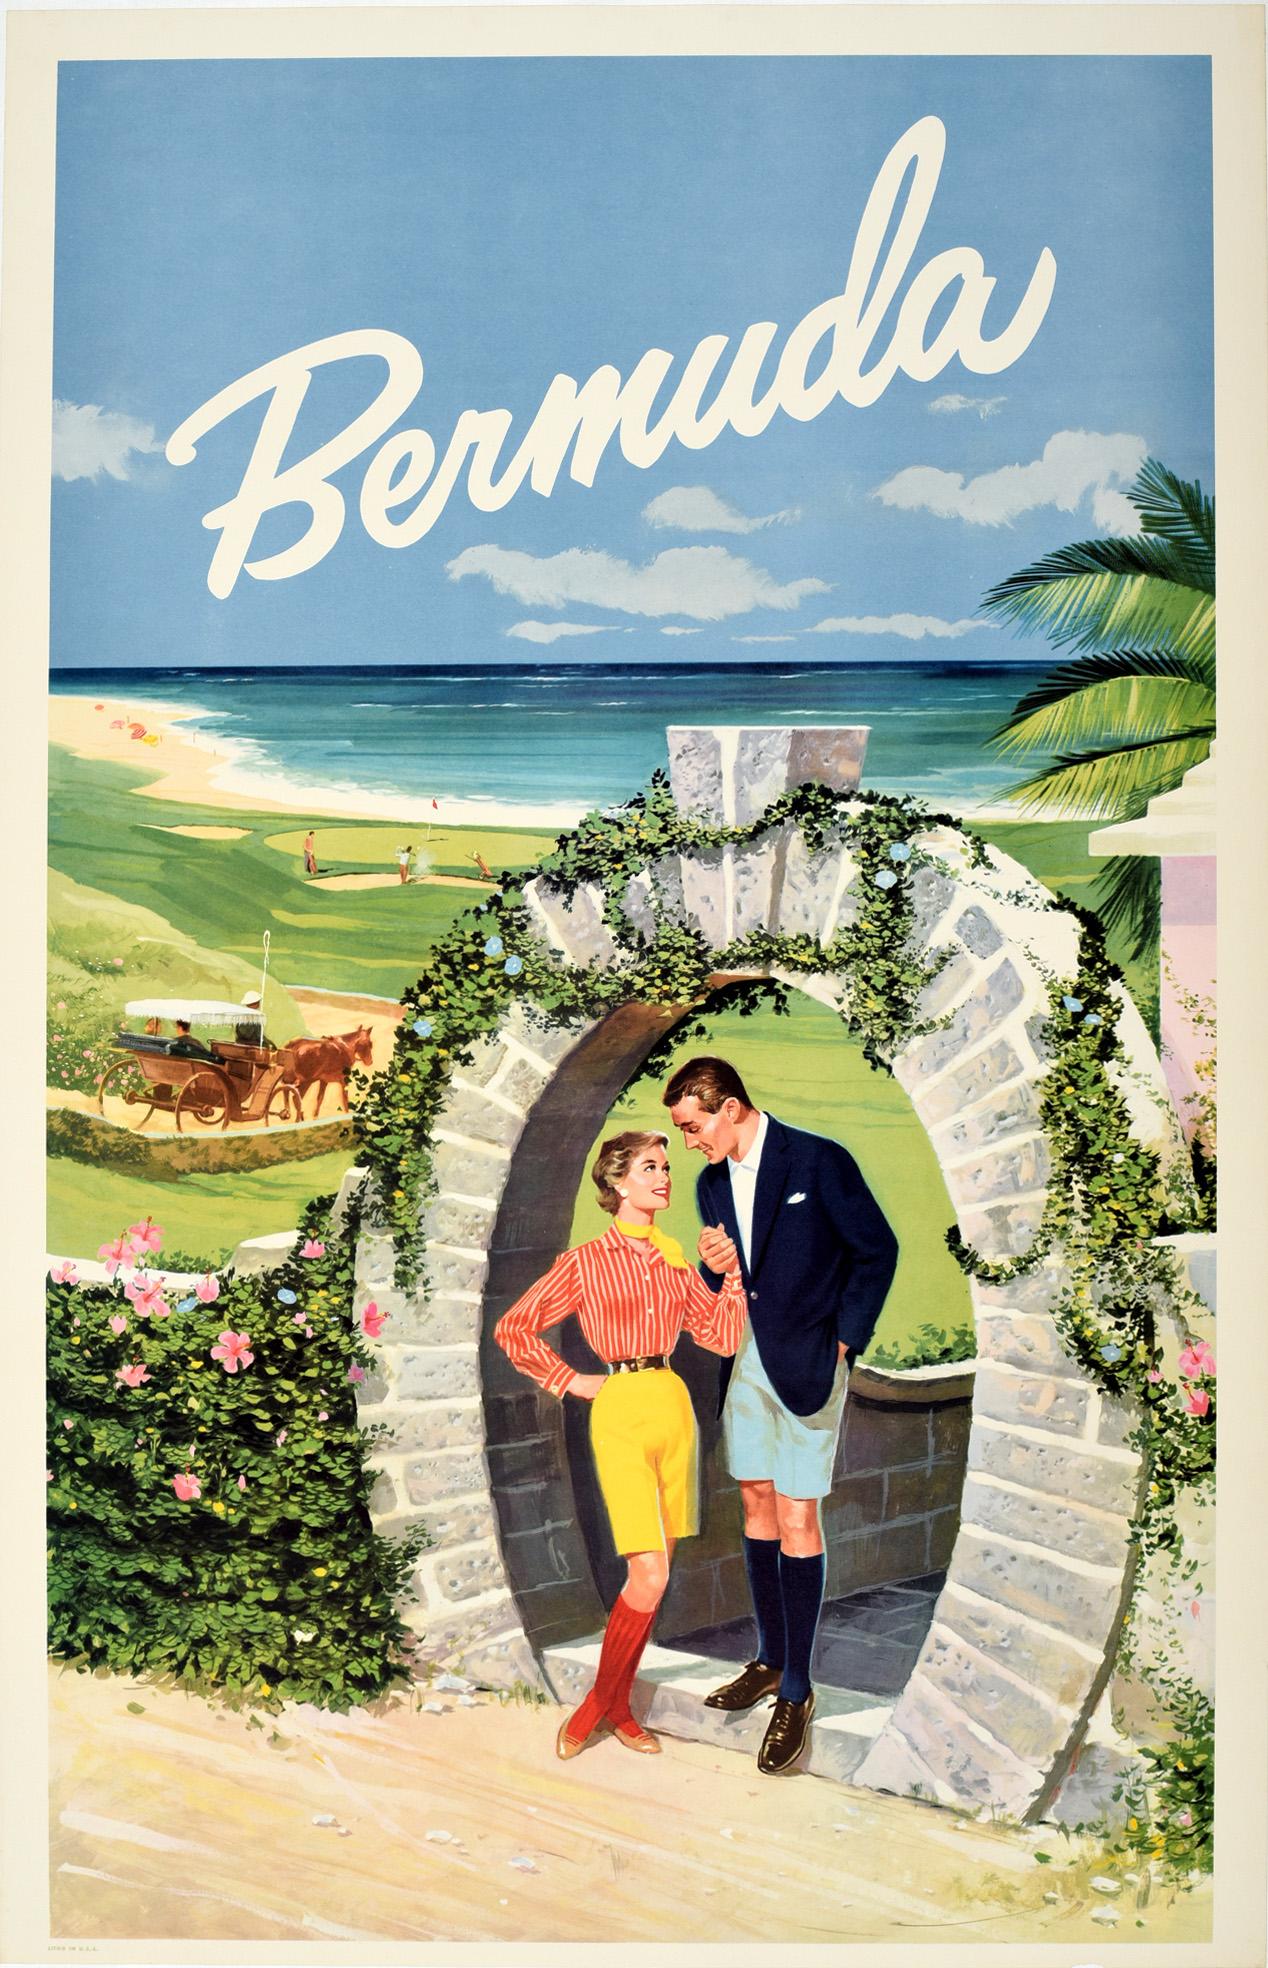 Unknown Print - Original Vintage Travel Poster Bermuda Moongate Arch Golf Beach Horse Carriage